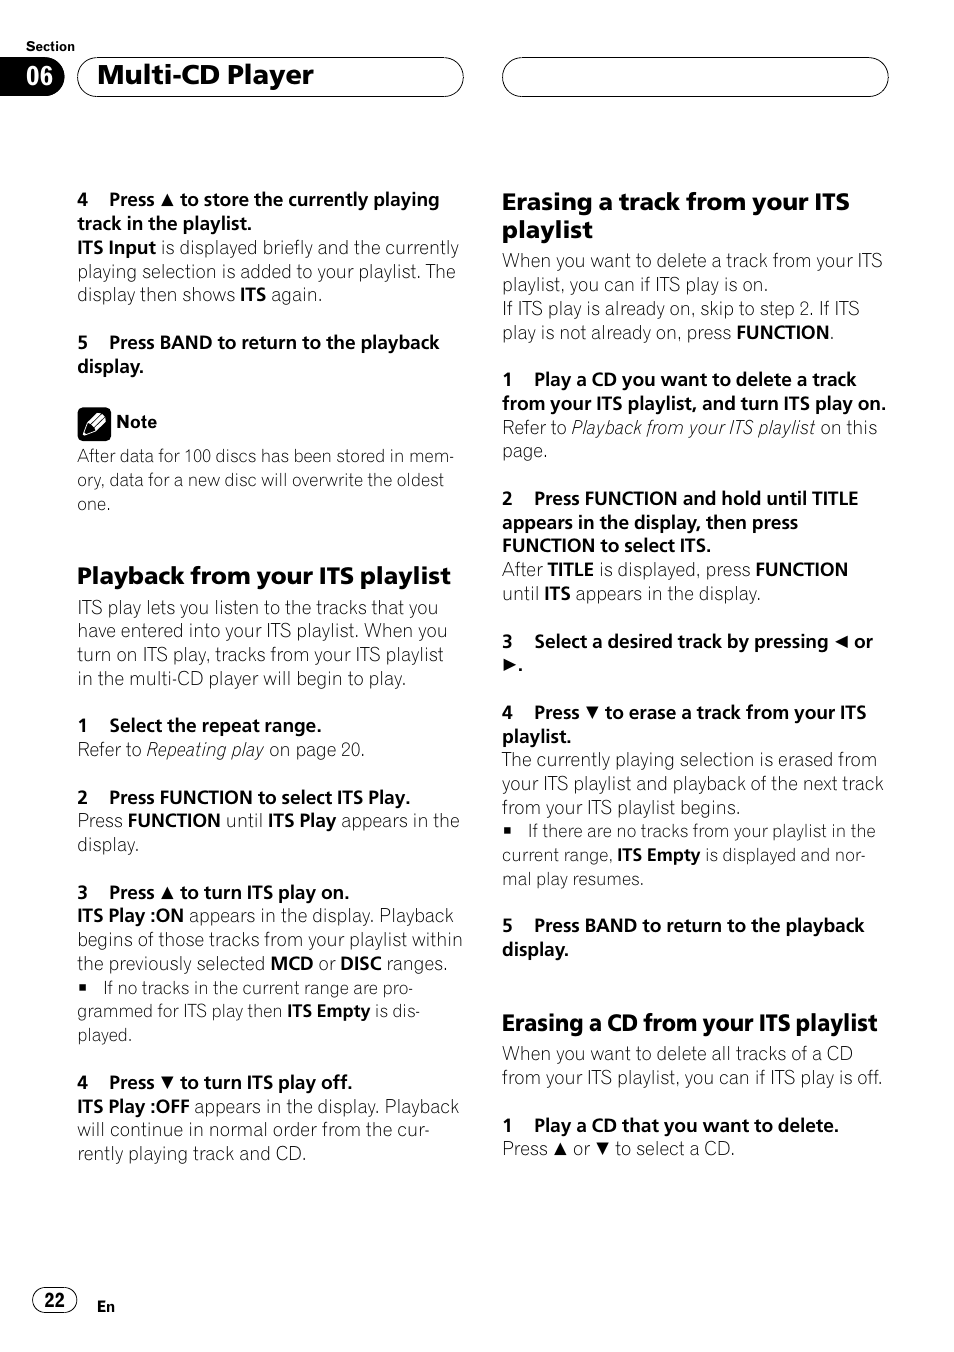 Playback from your its playlist 22, Erasing a track from your its, Playlist 22 | Erasing a cd from your its, Multi-cd player, Playback from your its playlist, Erasing a track from your its playlist, Erasing a cd from your its playlist | Pioneer DEH-P6500 Manuel d'utilisation | Page 22 / 92